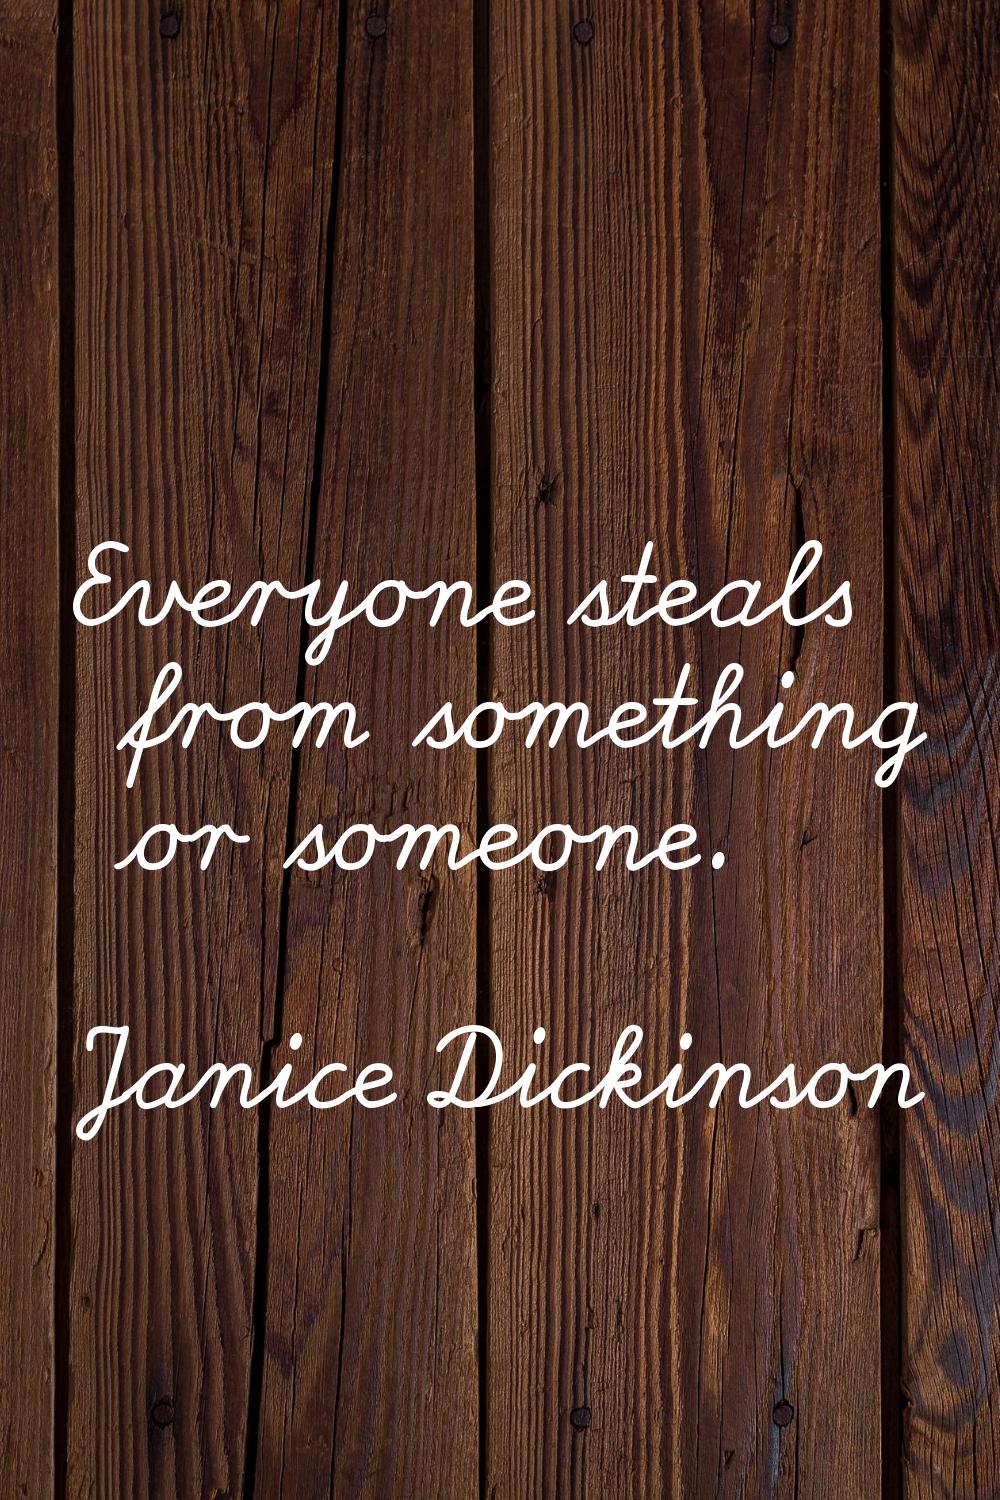 Everyone steals from something or someone.